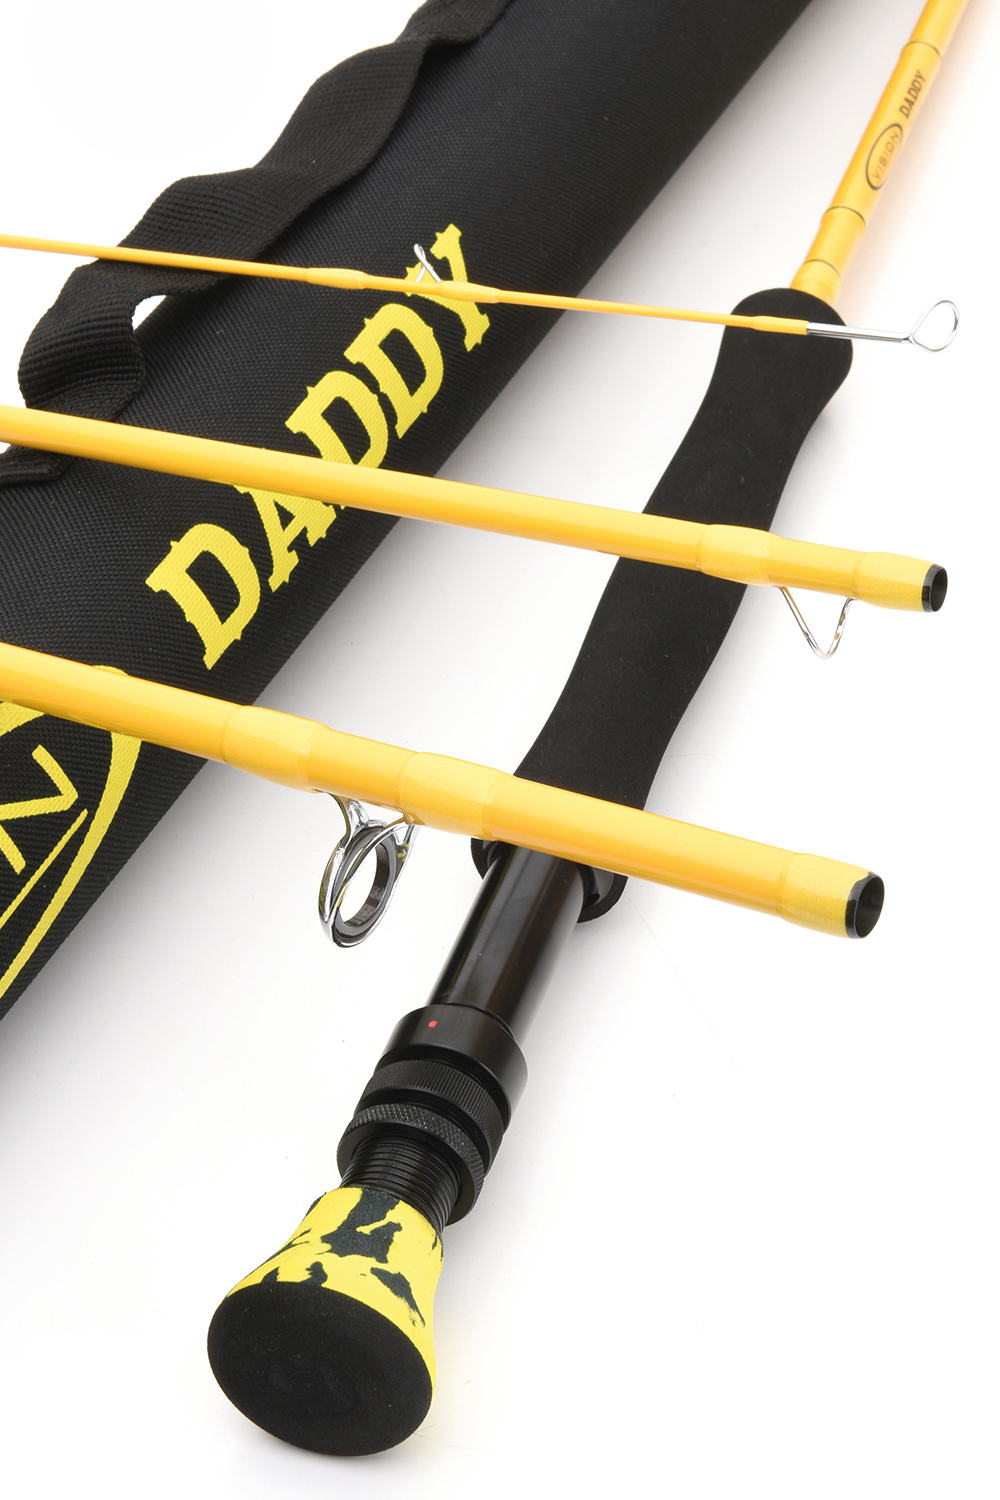 Vision Daddy Fly Rod 9 foot #10